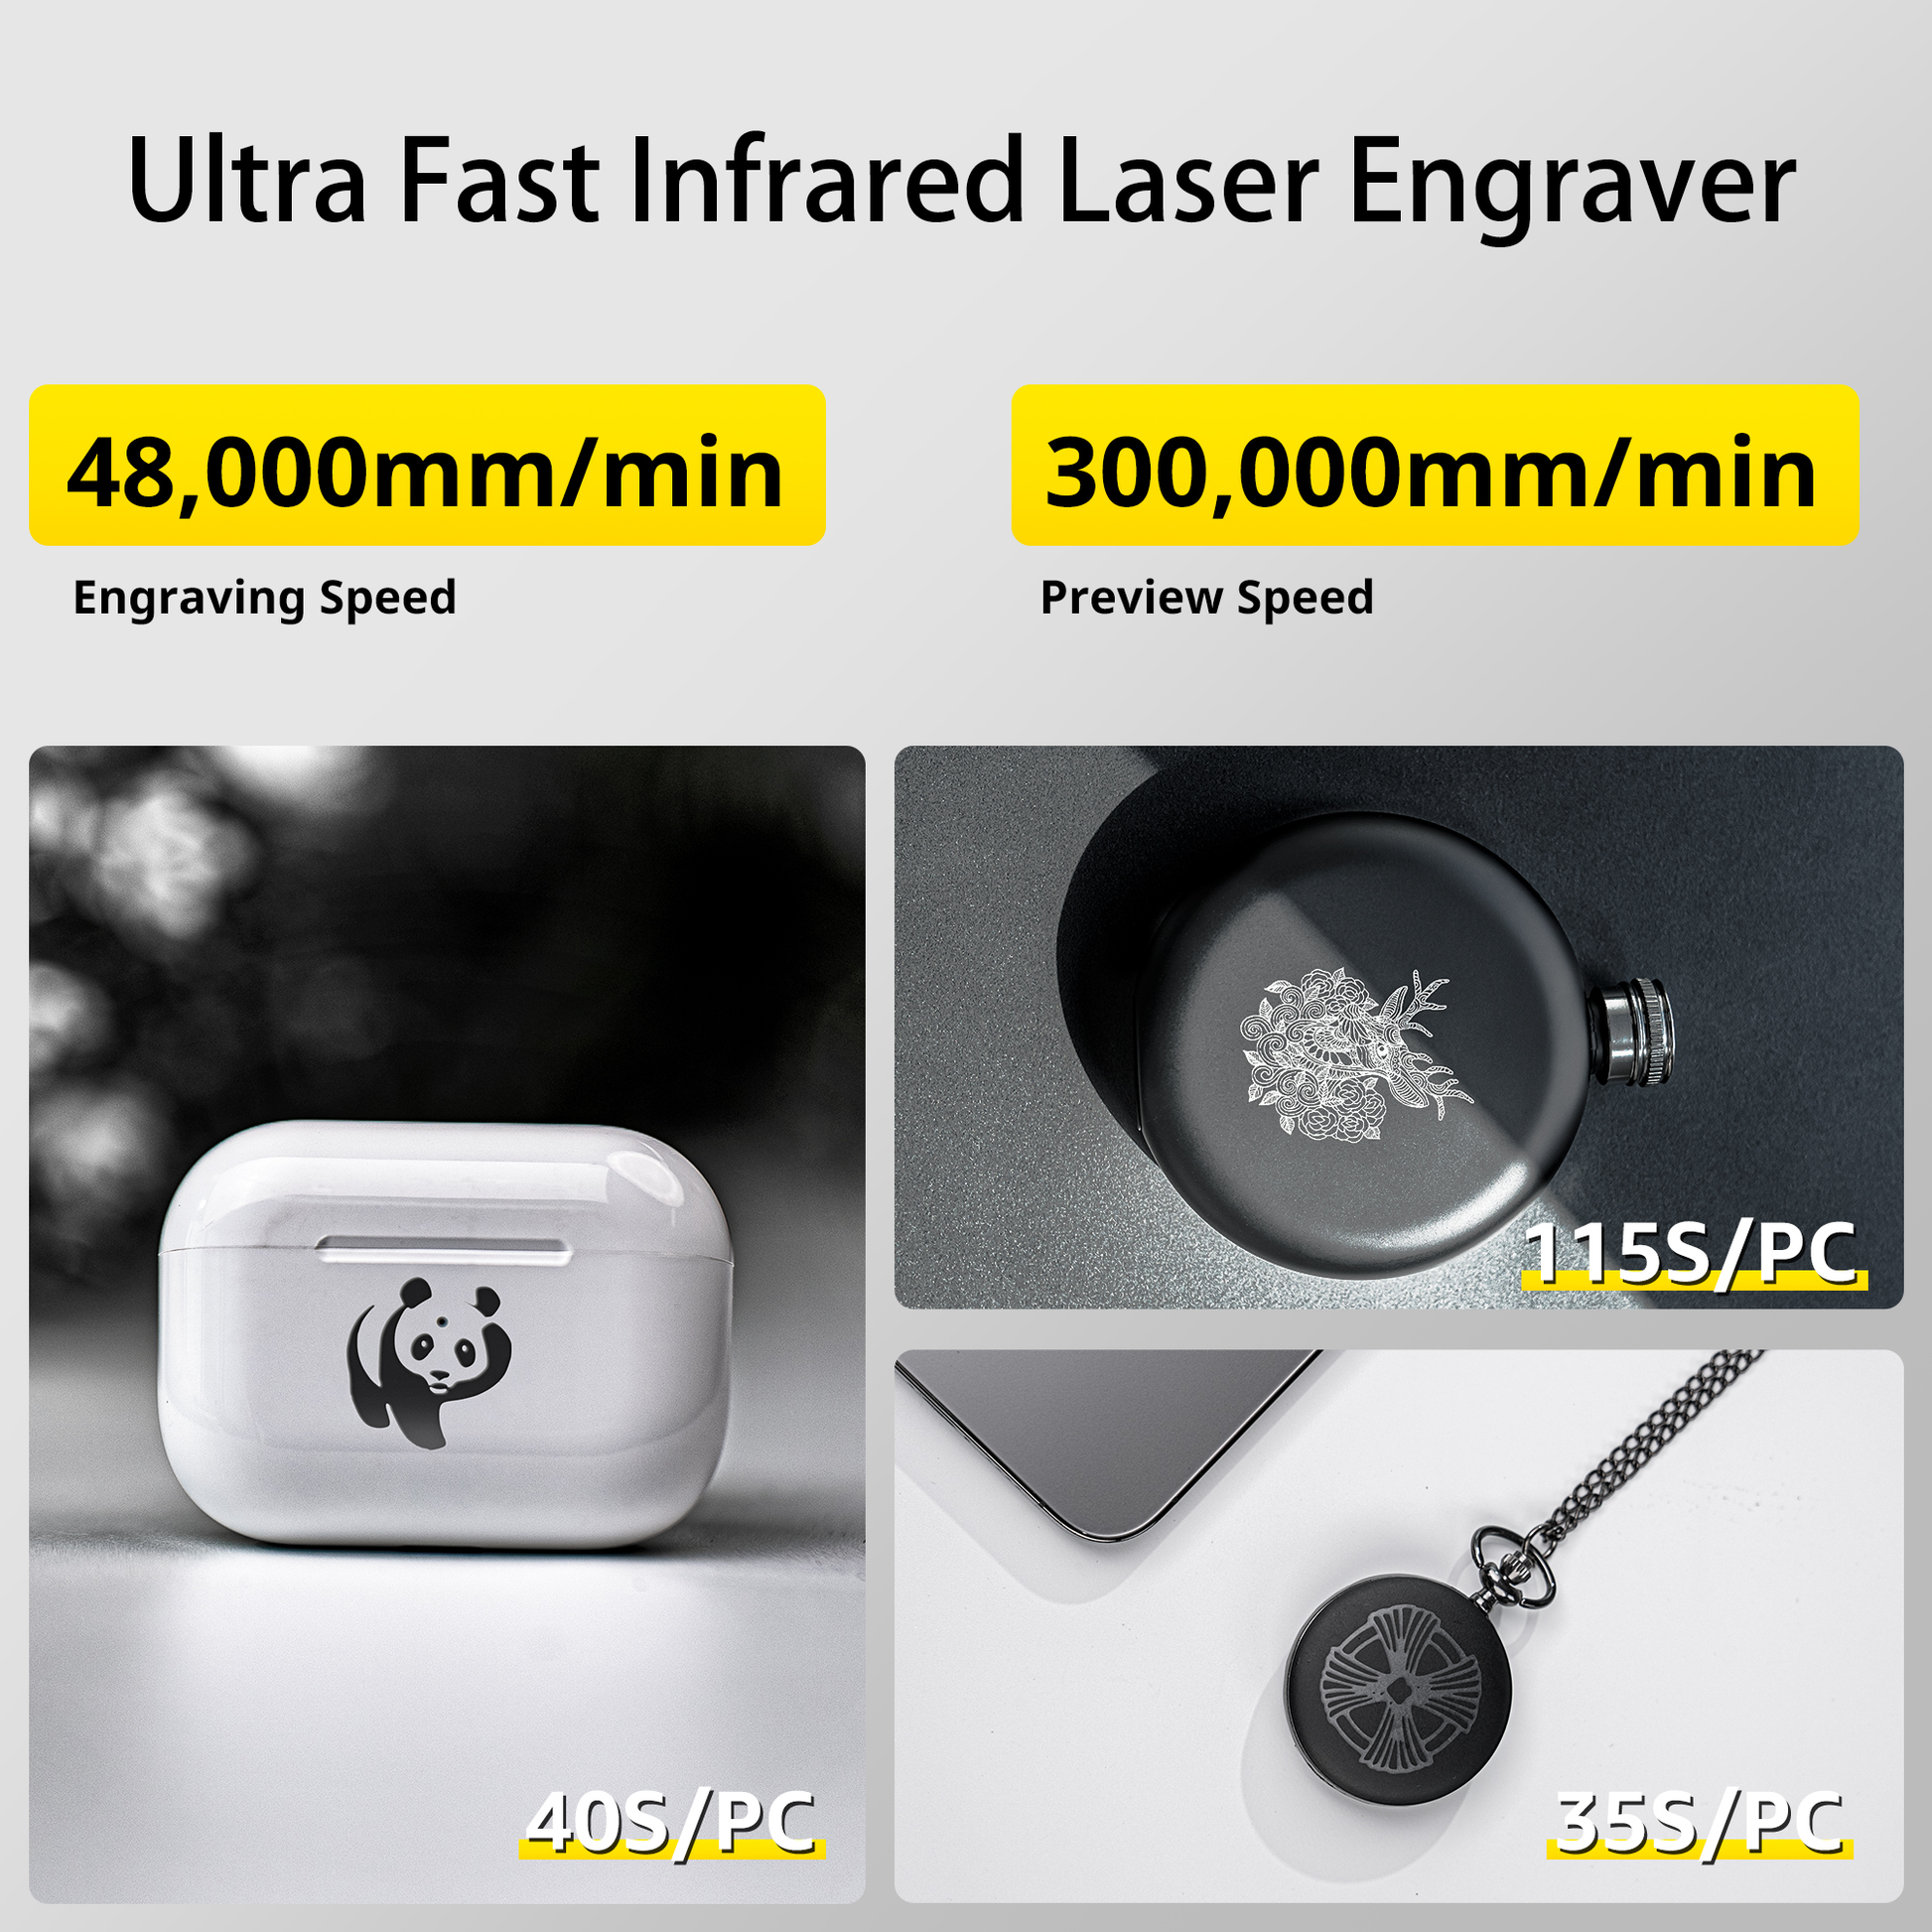 Up to 48000mm/min ultra fast engraving speed